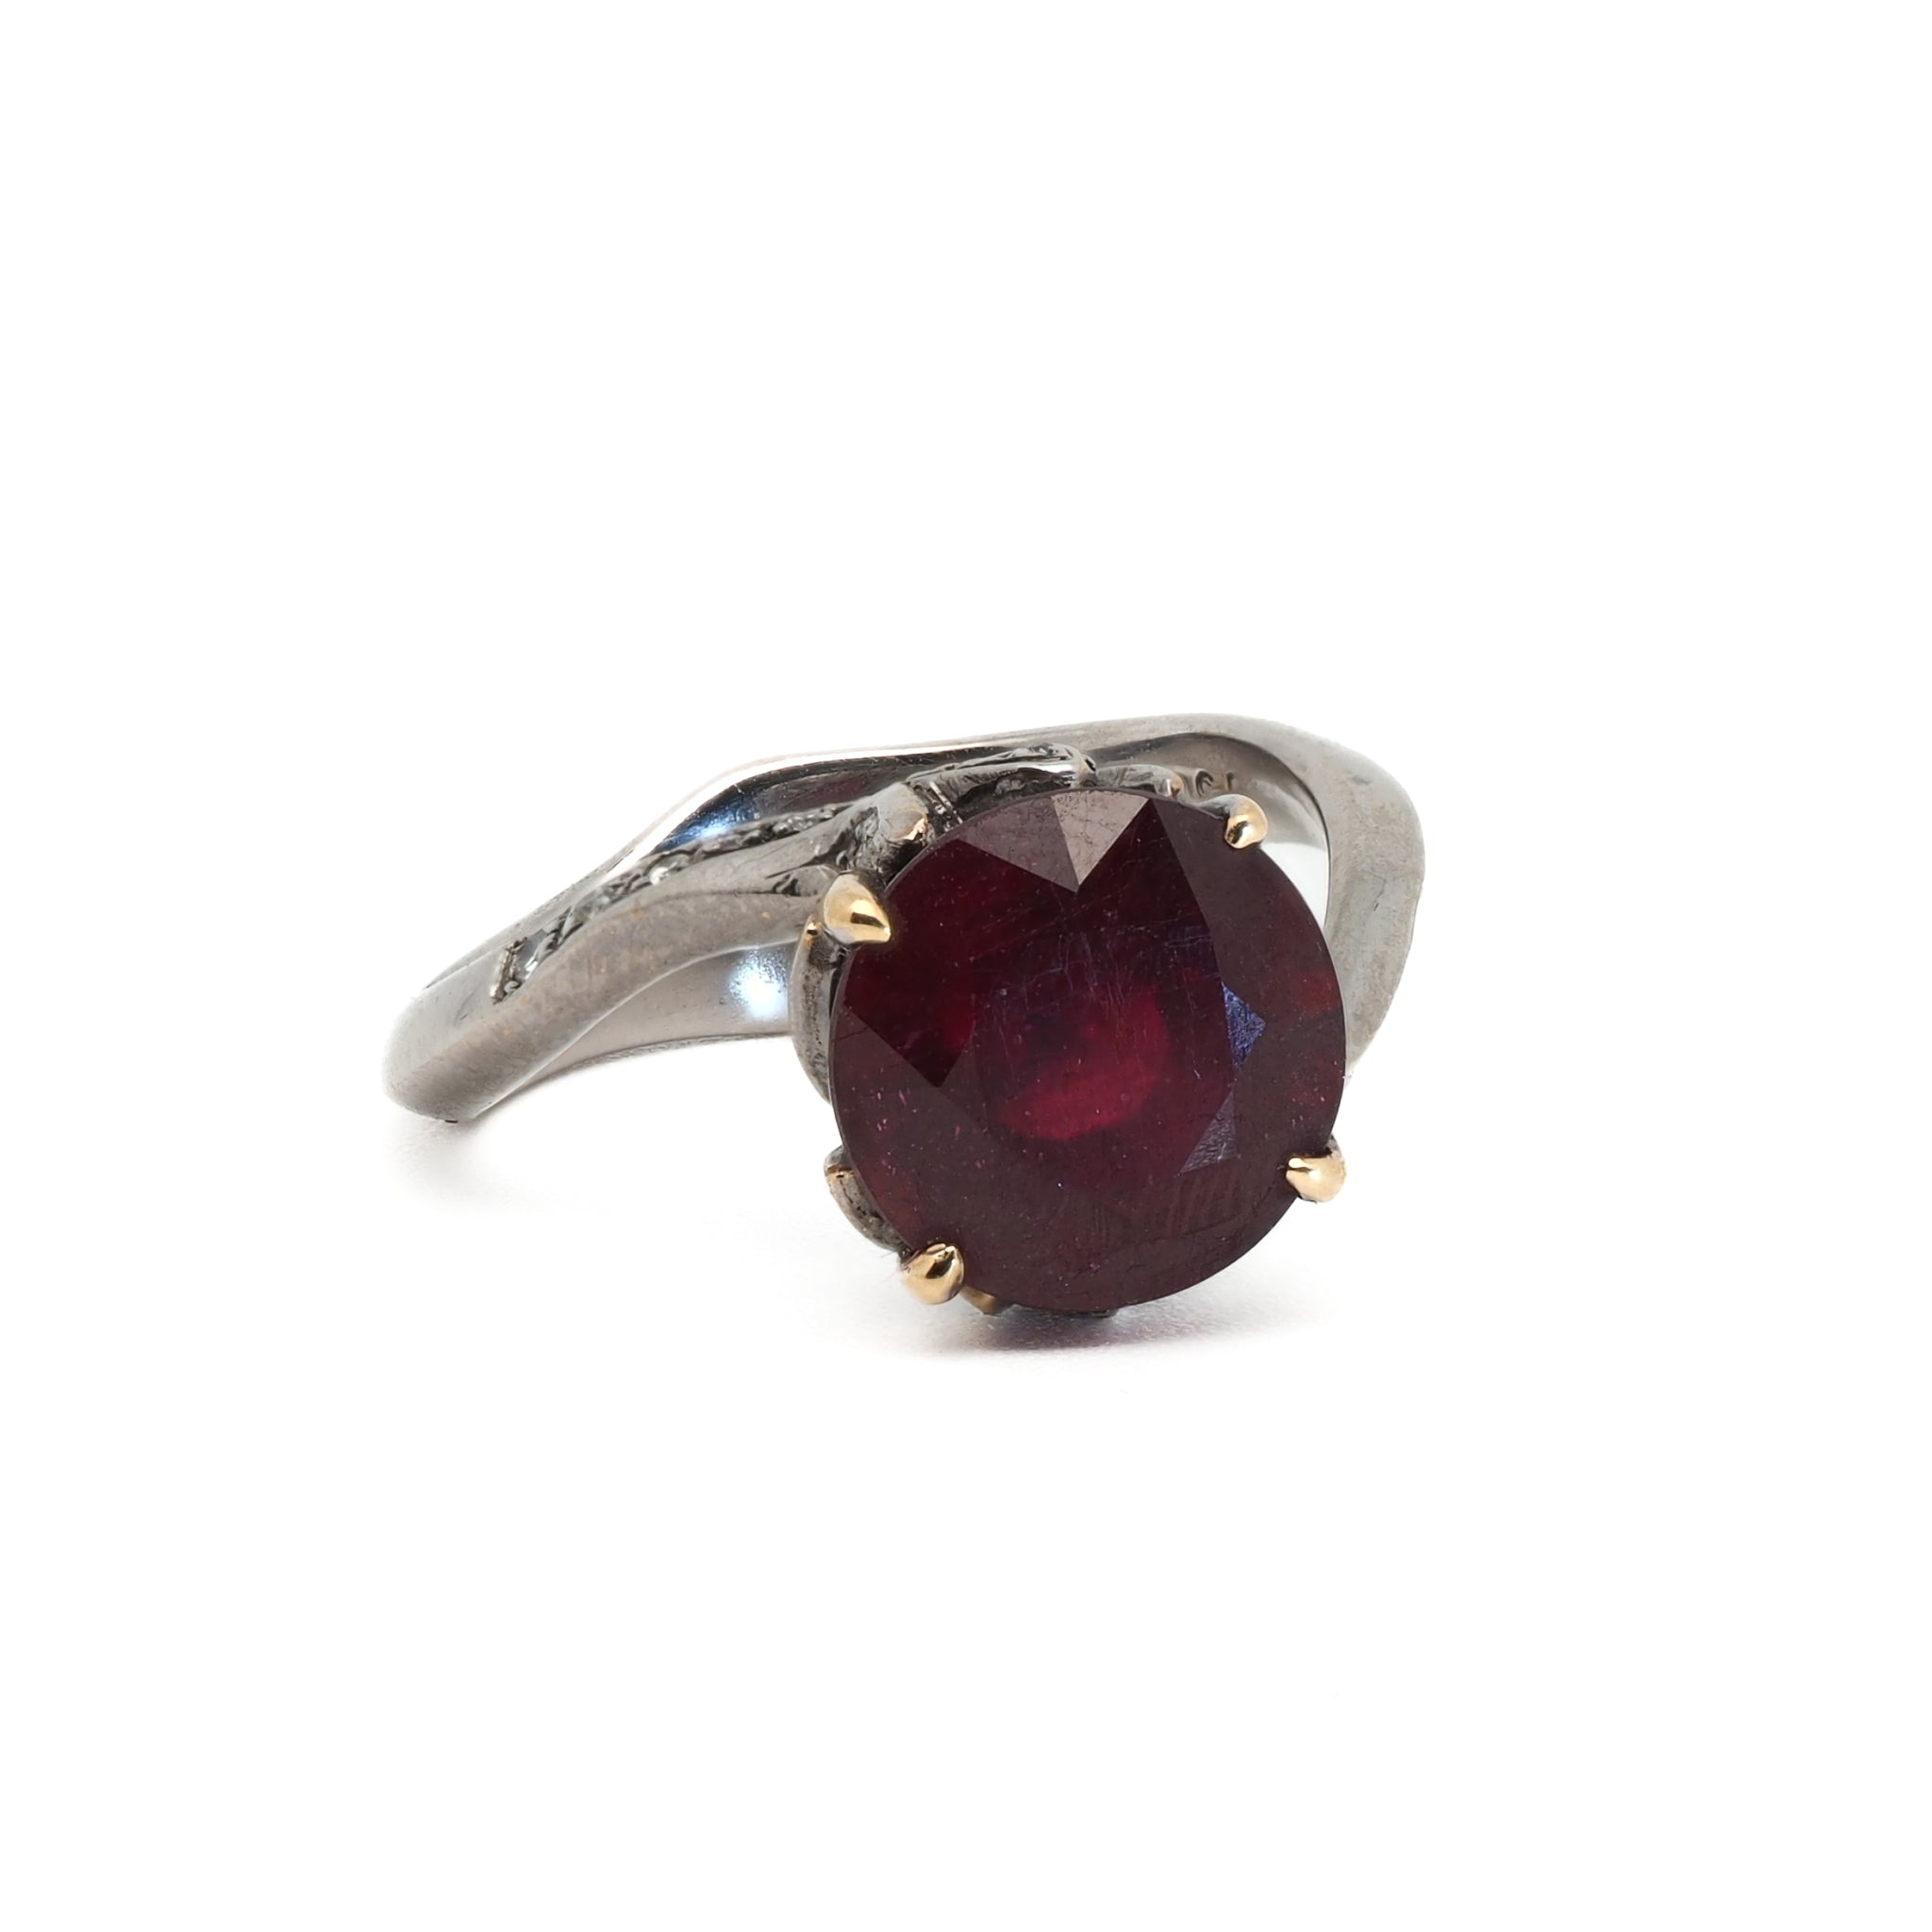 Twisted Ruby Engagement Ring - Handcrafted with 14k White and Yellow Gold, 0.15ct Diamonds, and 4.5ct Ruby.